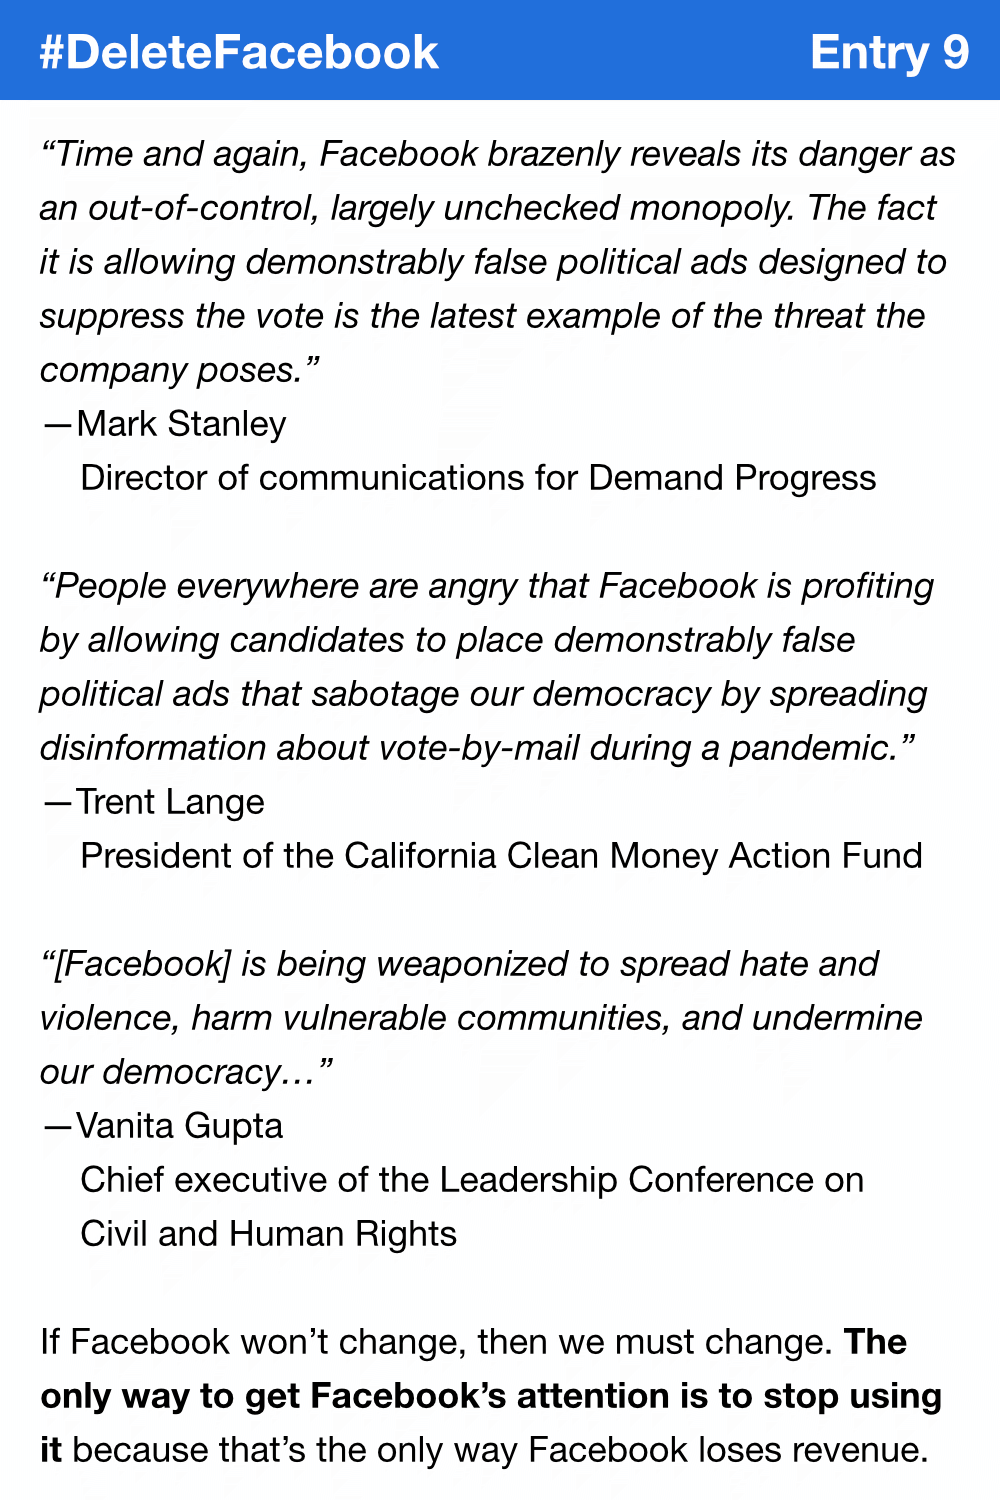 “Time and again, Facebook brazenly reveals its danger as an out-of-control, largely unchecked monopoly. The fact it is allowing demonstrably false political ads designed to suppress the vote is the latest example of the threat the company poses.” Mark Stanley, director of communications for Demand Progress. “People everywhere are angry that Facebook is profiting by allowing candidates to place demonstrably false political ads that sabotage our democracy by spreading disinformation about vote-by-mail during a pandemic.” Trent Lange, President of the California Clean Money Action Fund. “[Facebook] is being weaponized to spread hate and violence, harm vulnerable communities, and undermine our democracy…” Vanita Gupta, chief executive of the Leadership Conference on Civil and Human Rights. If Facebook won’t change, then we must change. The only way to get Facebook’s attention is to stop using it because that’s the only way Facebook loses revenue.